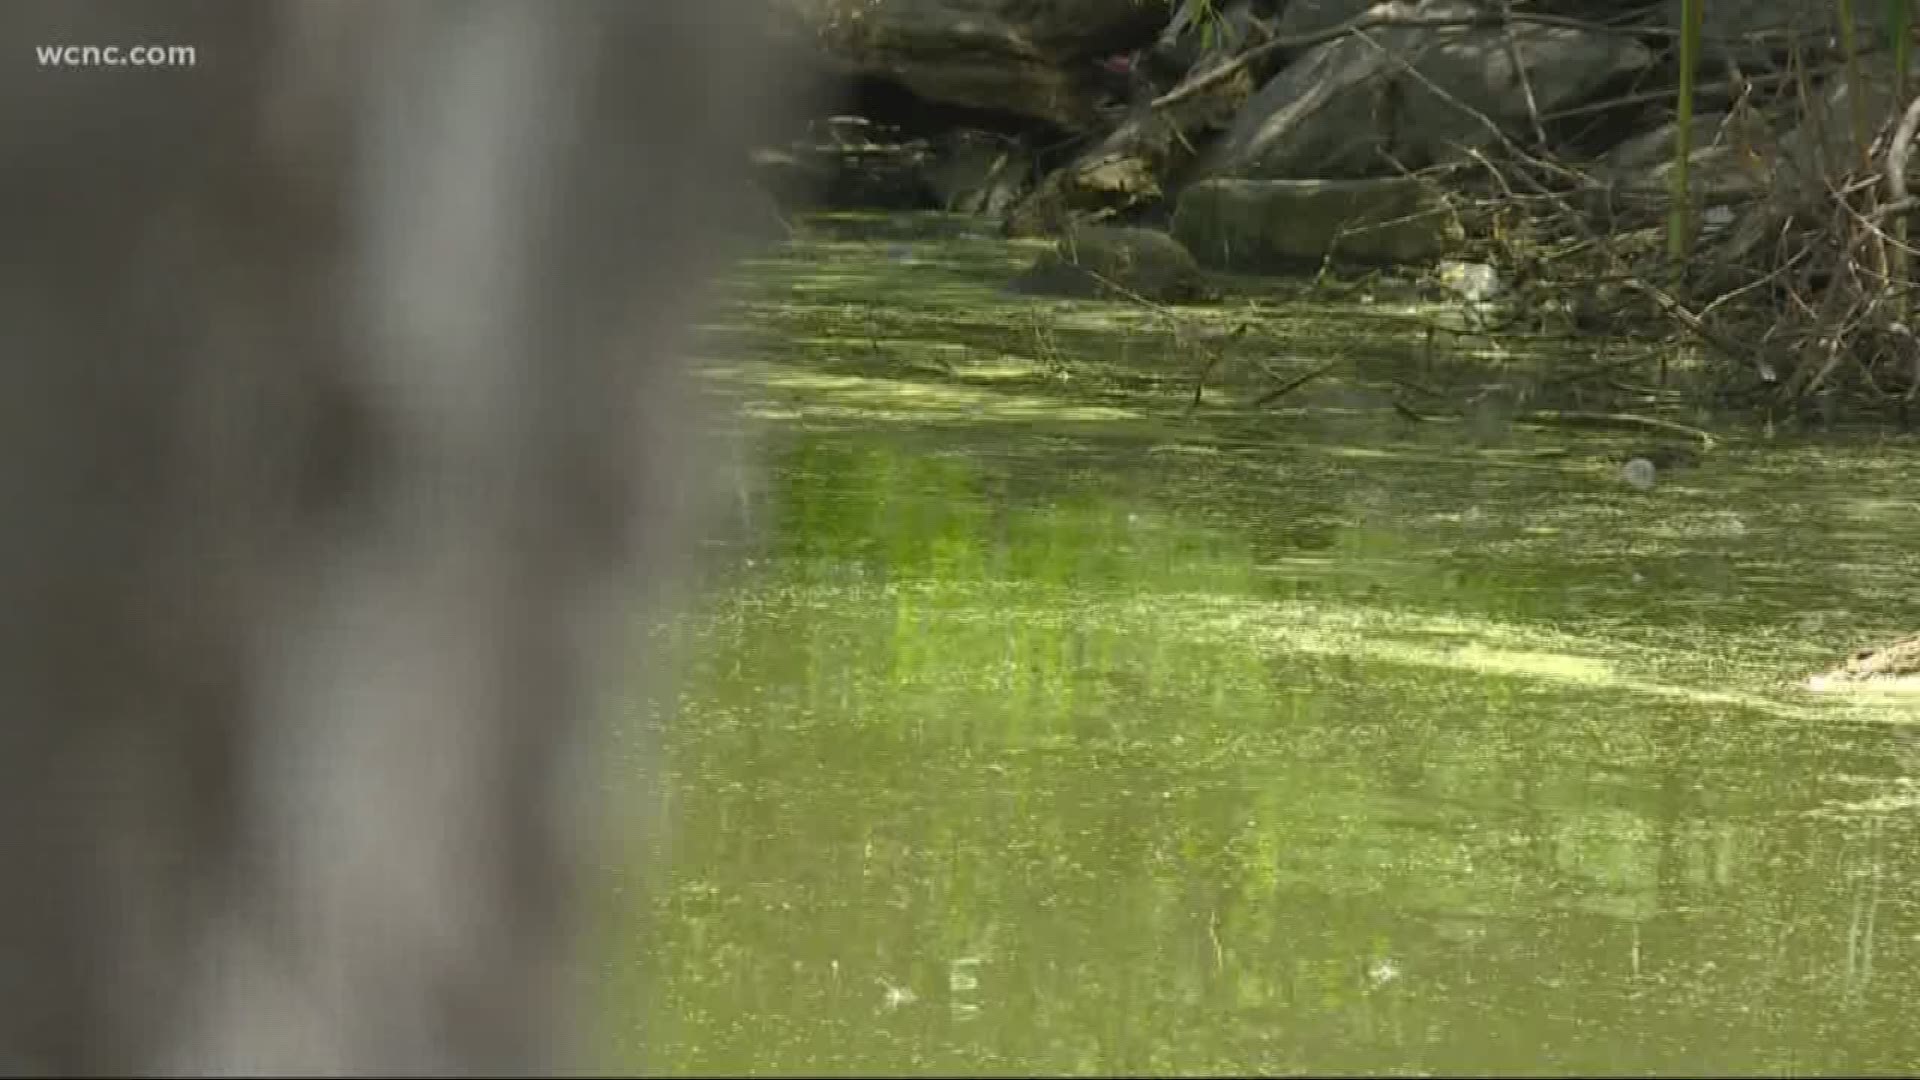 Charlotte's Park Road Pond has tested positive for the toxic blue-green algae that's responsible for killing at least three dogs in North Carolina.